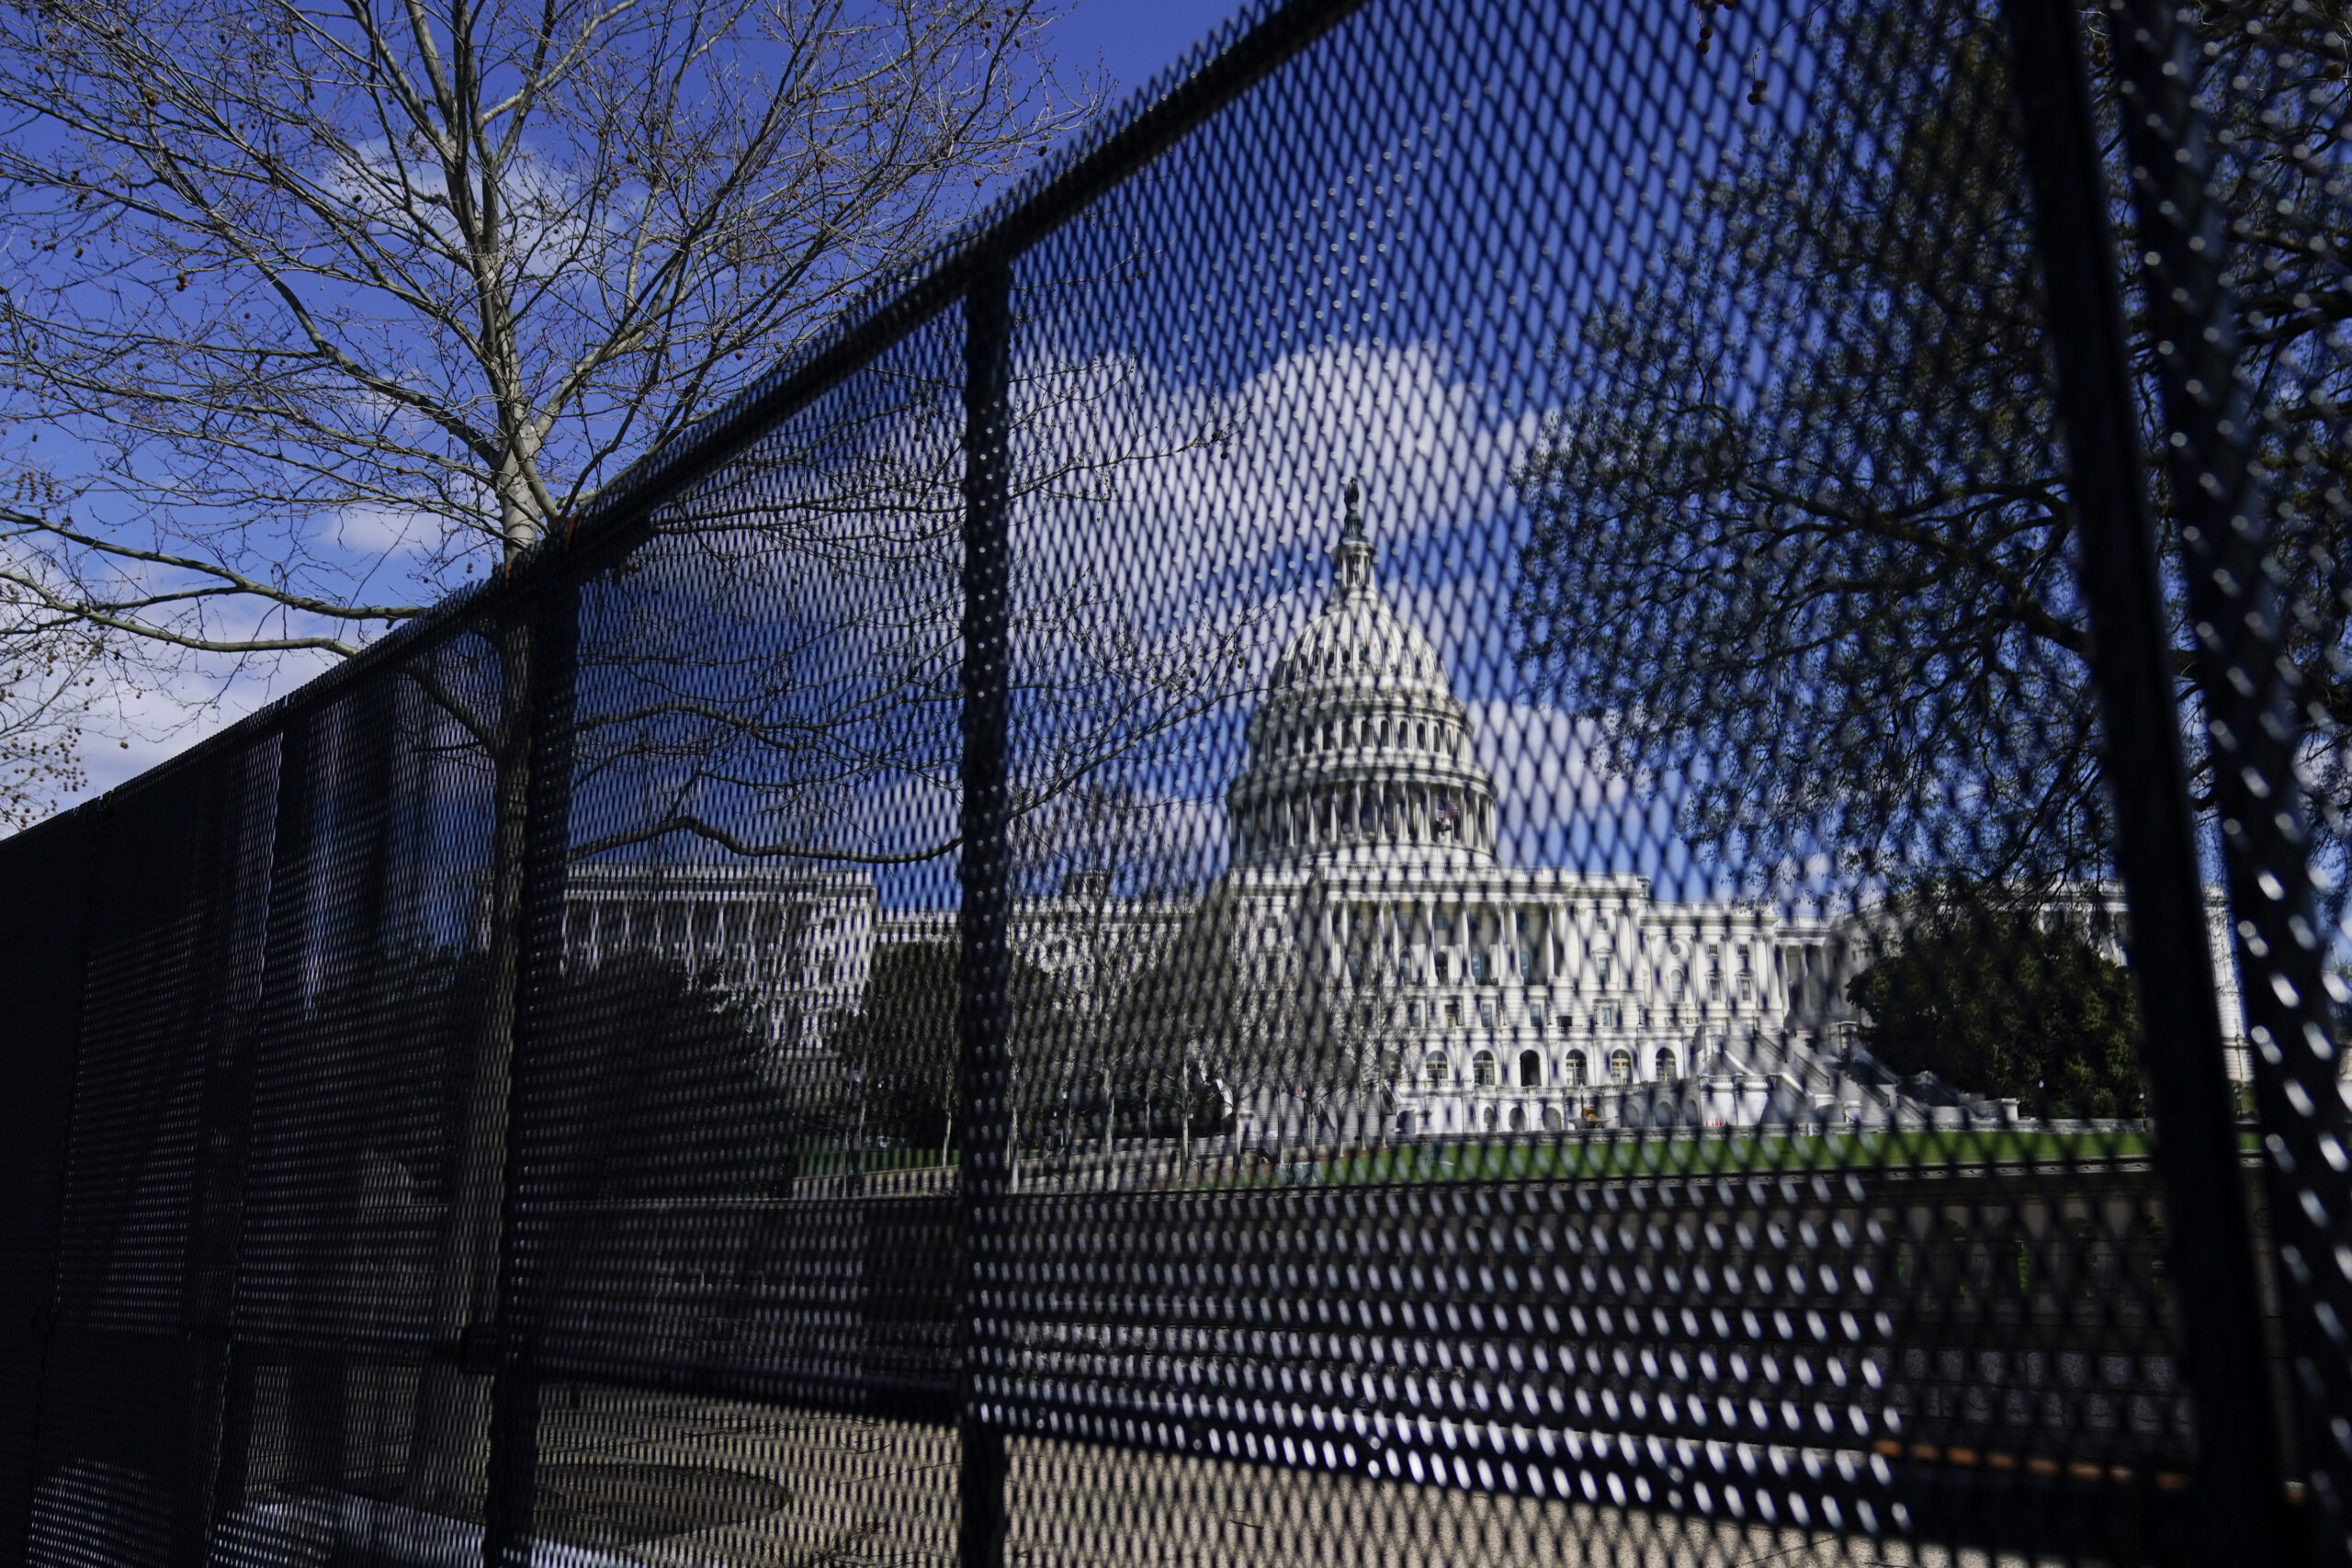 The U.S. Capitol is seen behind security fencing after a car that crashed into a barrier on Capitol Hill in Washington, Friday, April 2, 2021. (AP Photo/Carolyn Kaster)